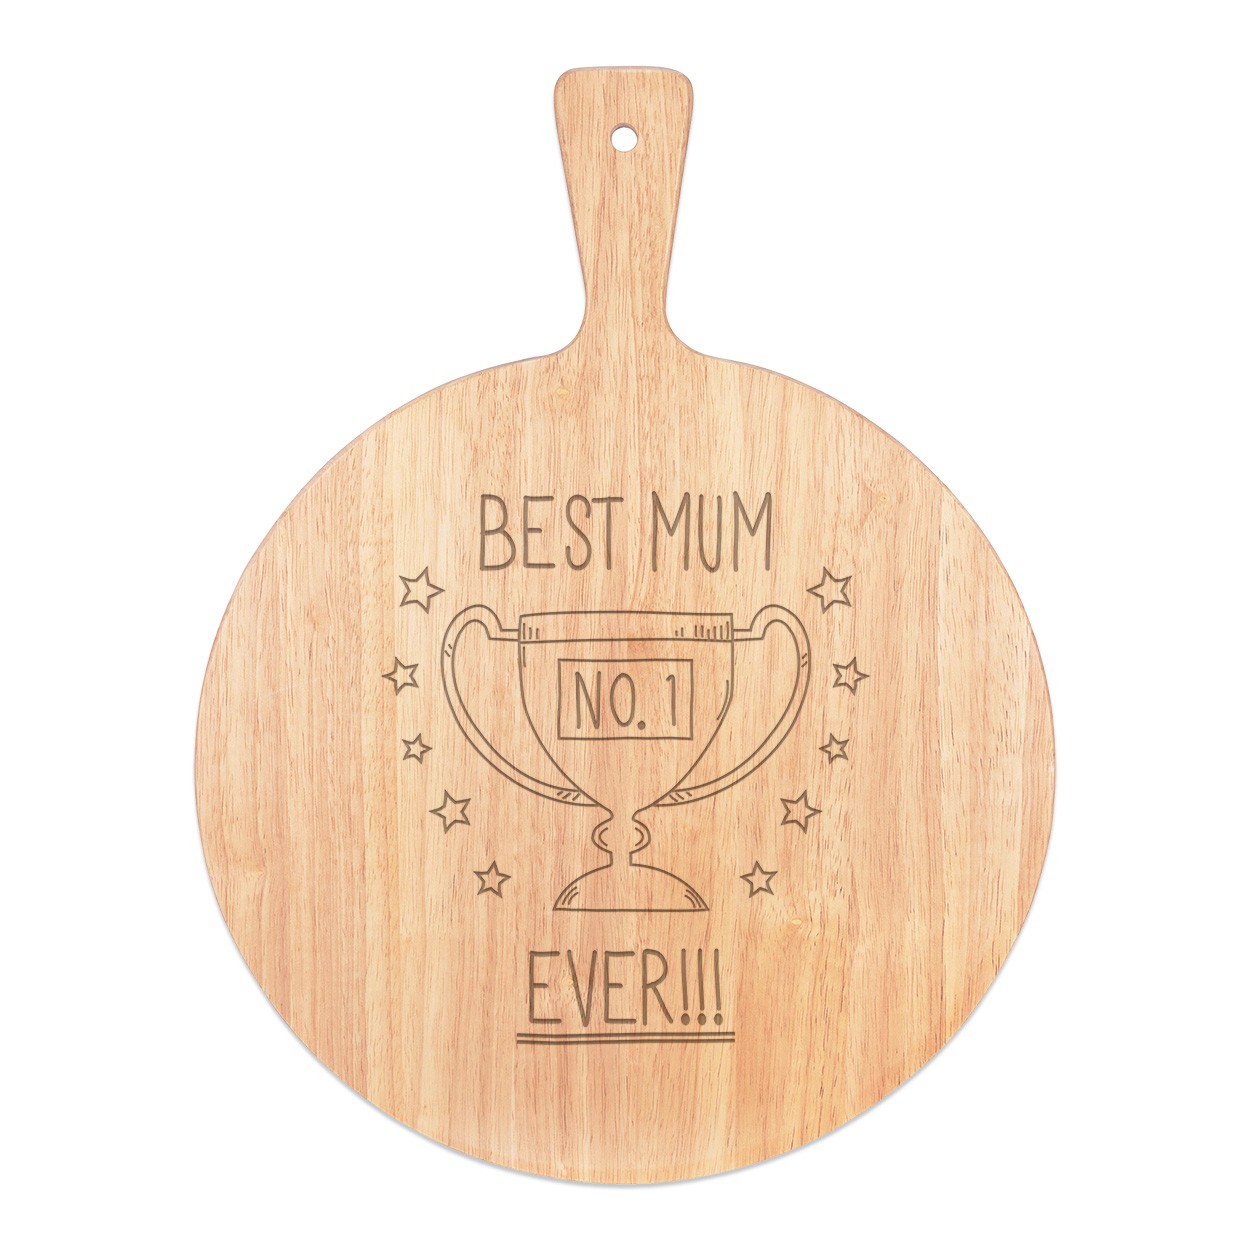 Best Mum Ever No.1 Pizza Board Paddle Serving Tray Handle Round Wooden 45x34cm